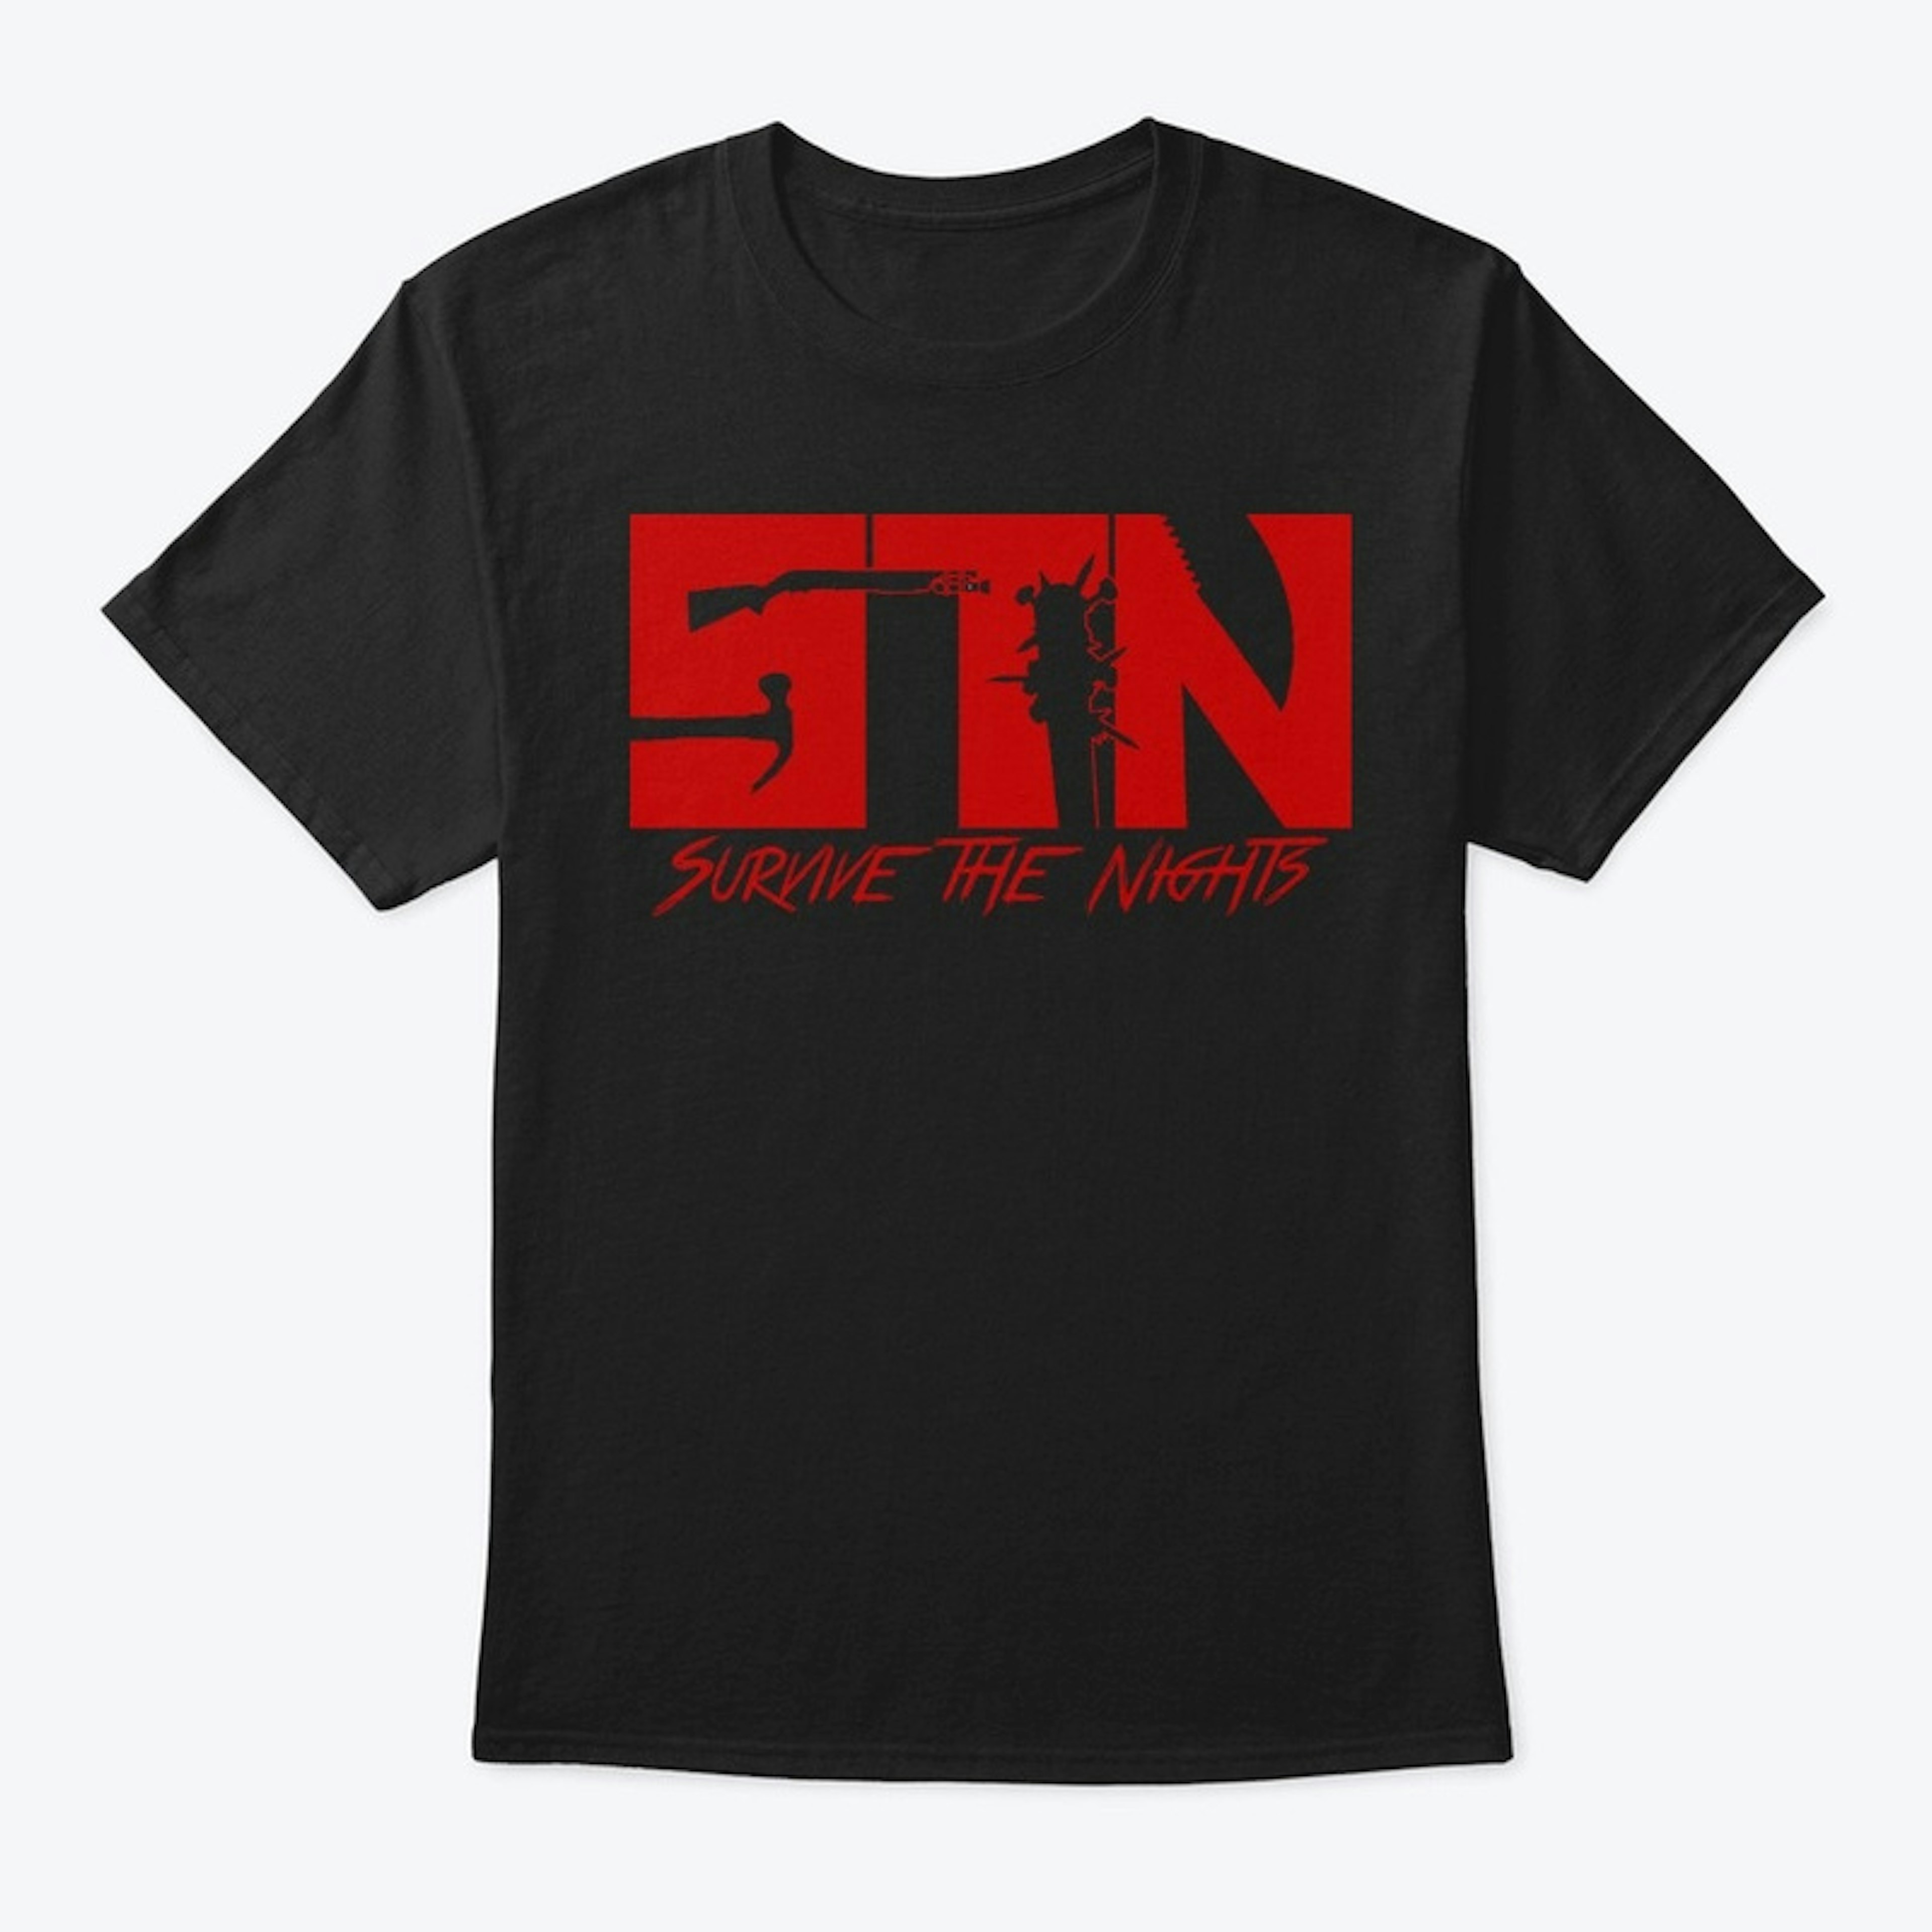 Classic Survive the Nights Tee